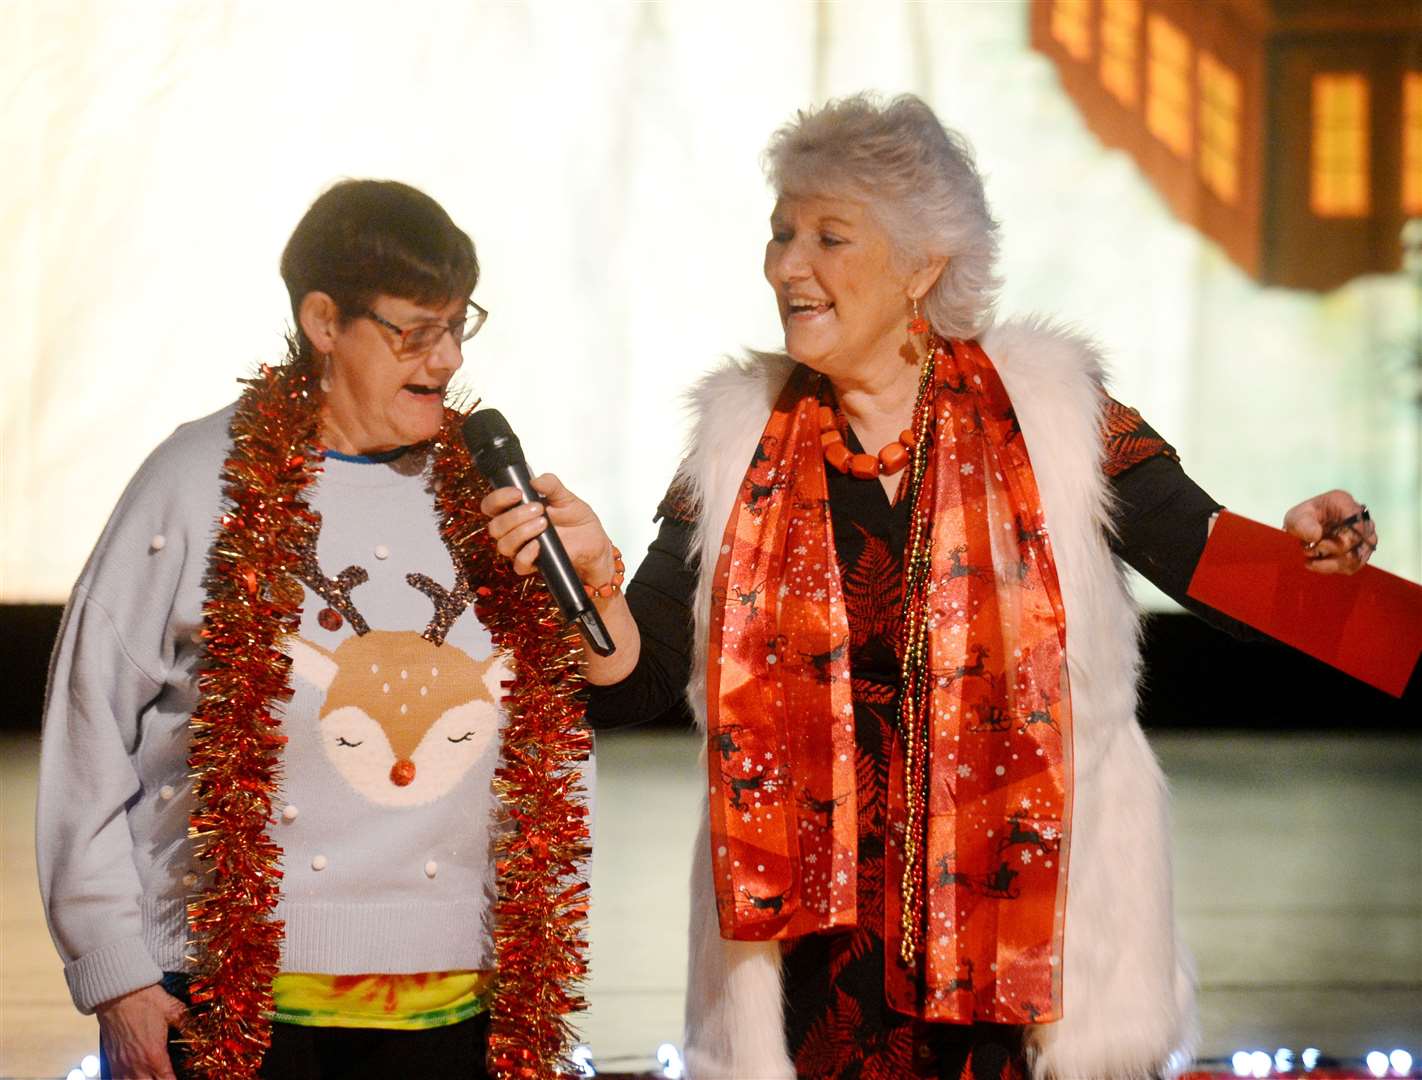 Mairi Hill joins Elsie Normington in a festive song.